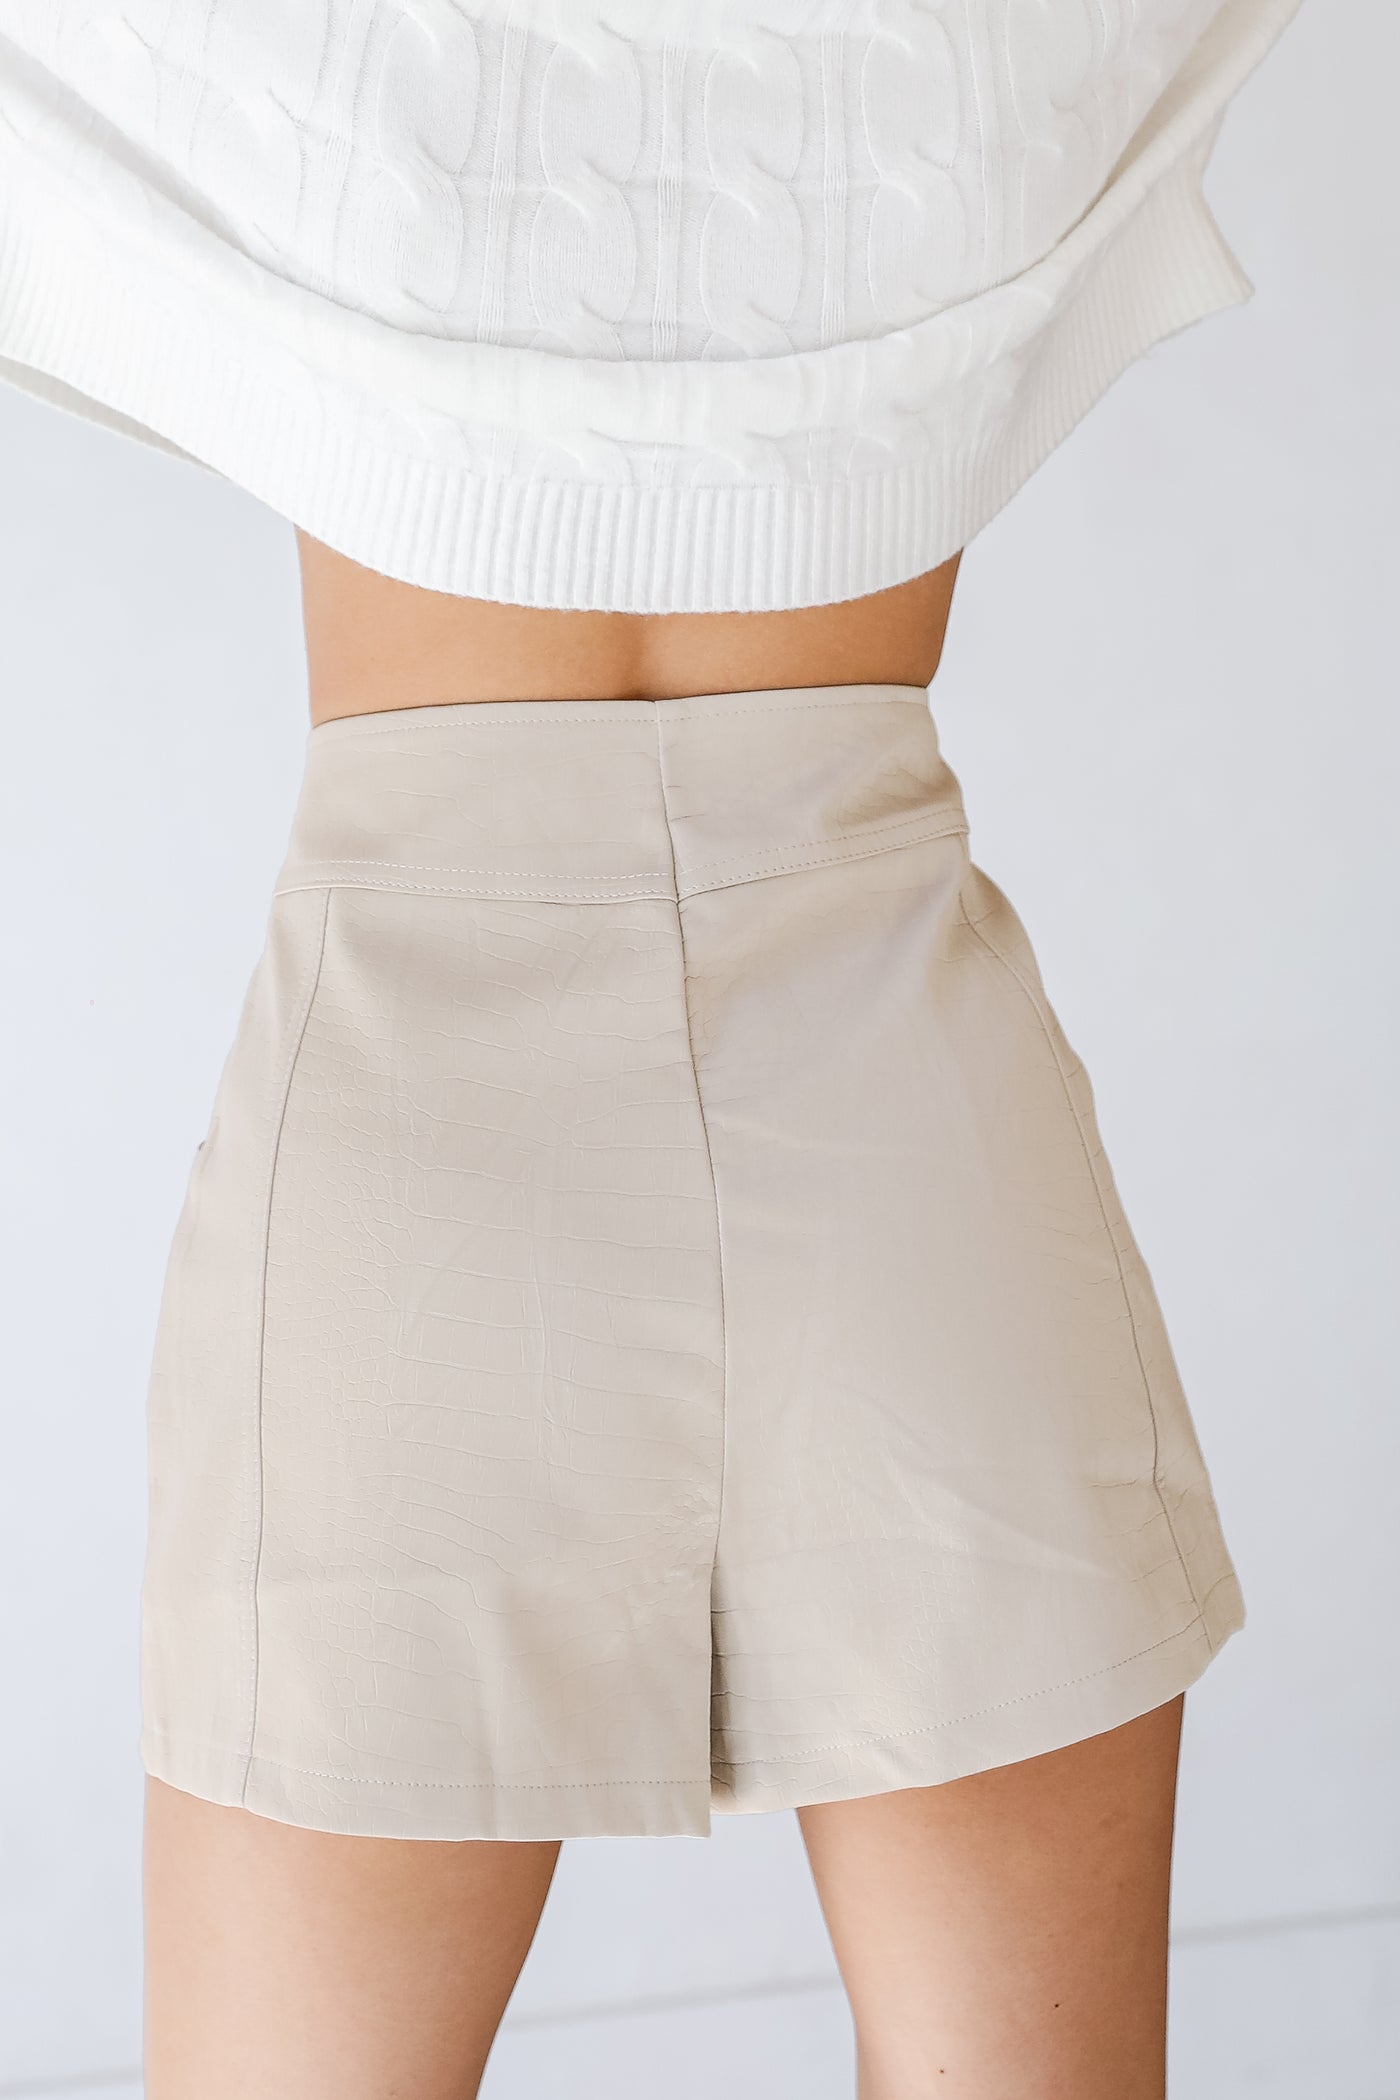 Faux Leather Shorts in ivory back view